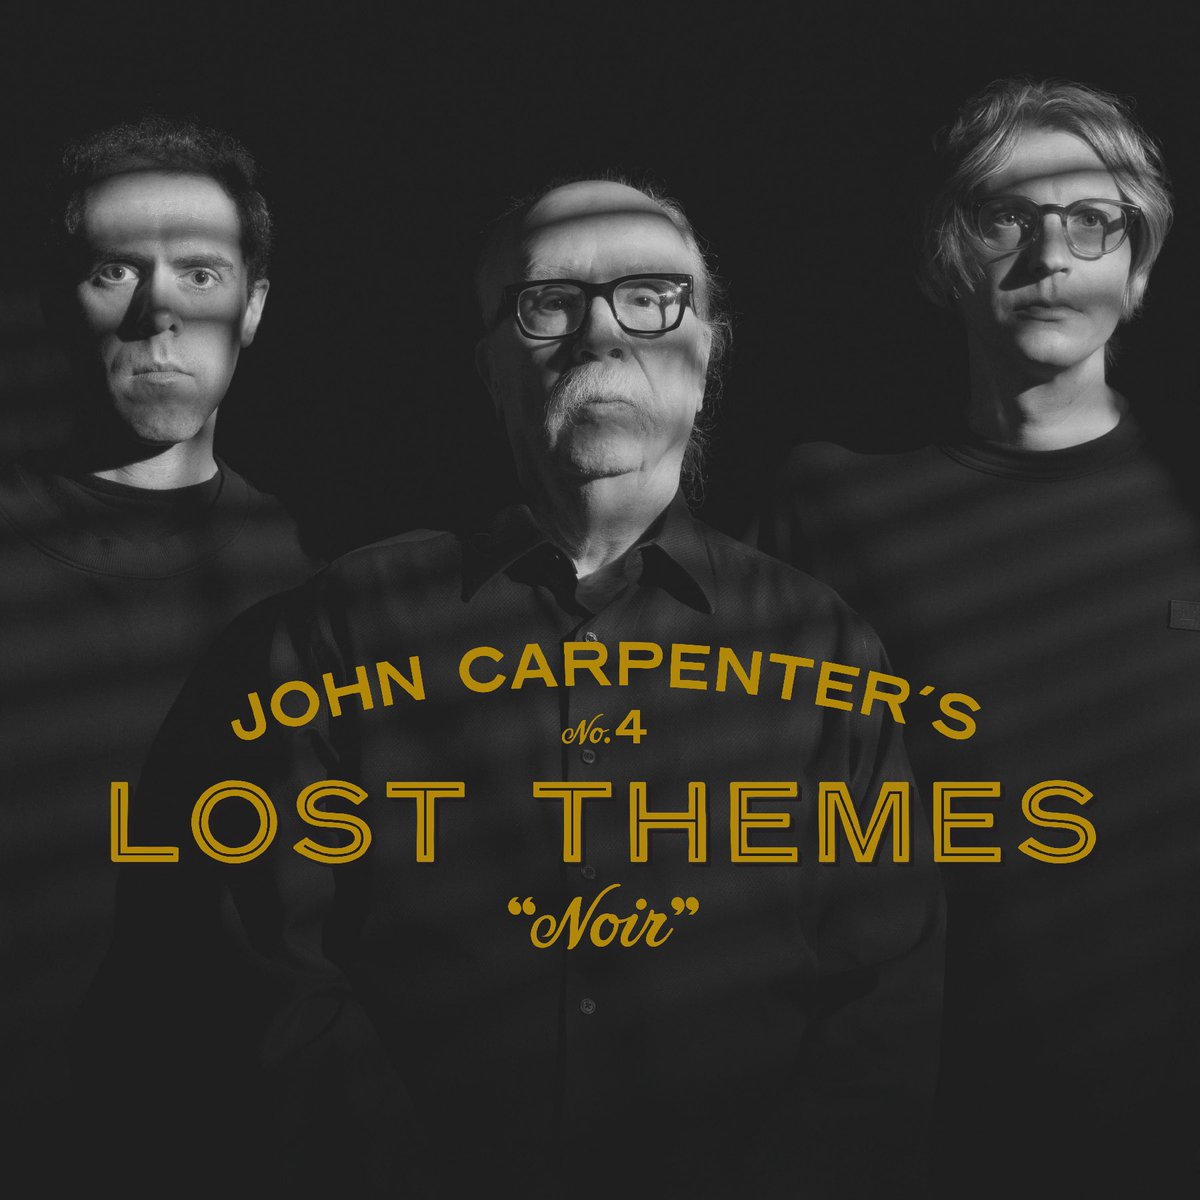 Big news today! The iconic trio John Carpenter, Cody Carpenter and @DDaviesMusic are back with their highly anticipated fourth installment in the Lost Themes series, Lost Themes IV: Noir. Pre-order a copy, releasing on May 3rd, on @SacredBones lnk.to/LTIVNoir